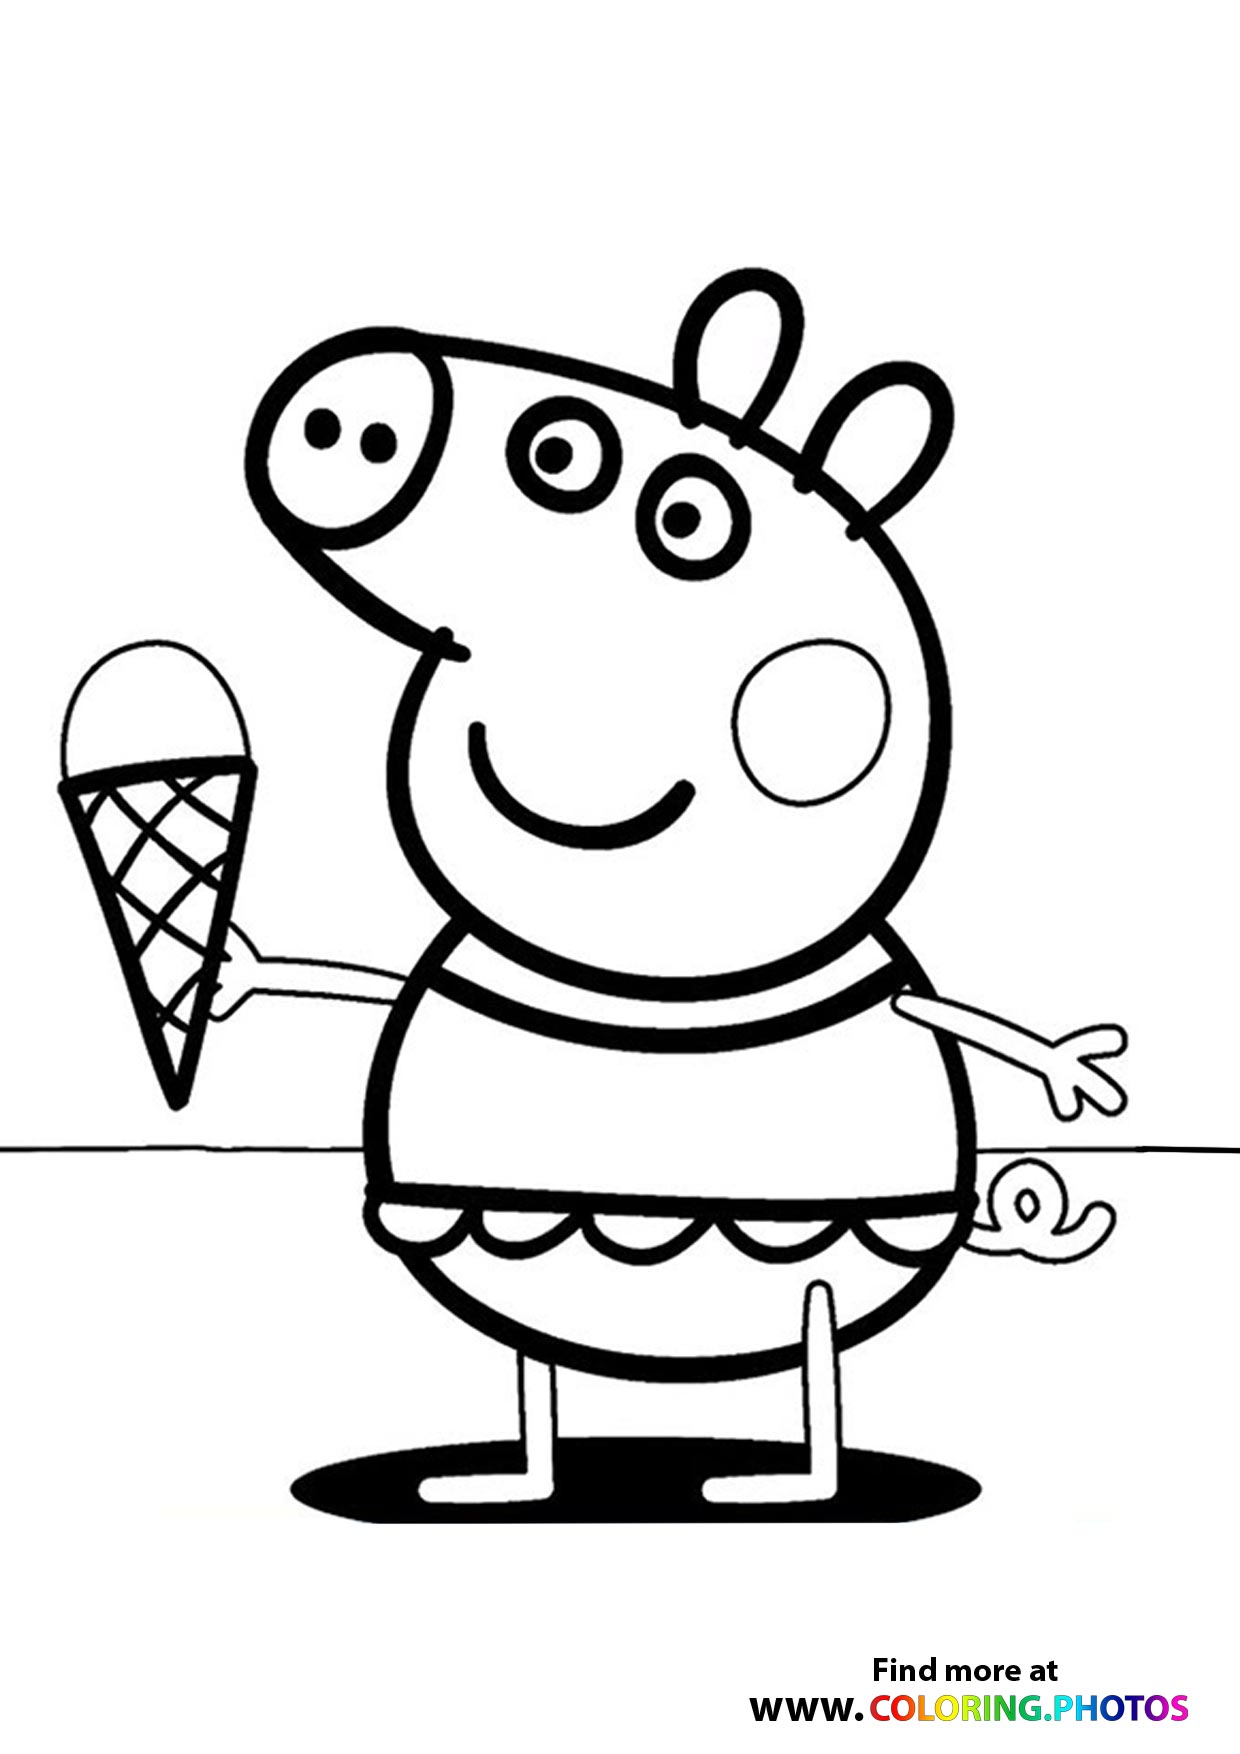 Luca eating Ice-cream - Coloring Pages for kids